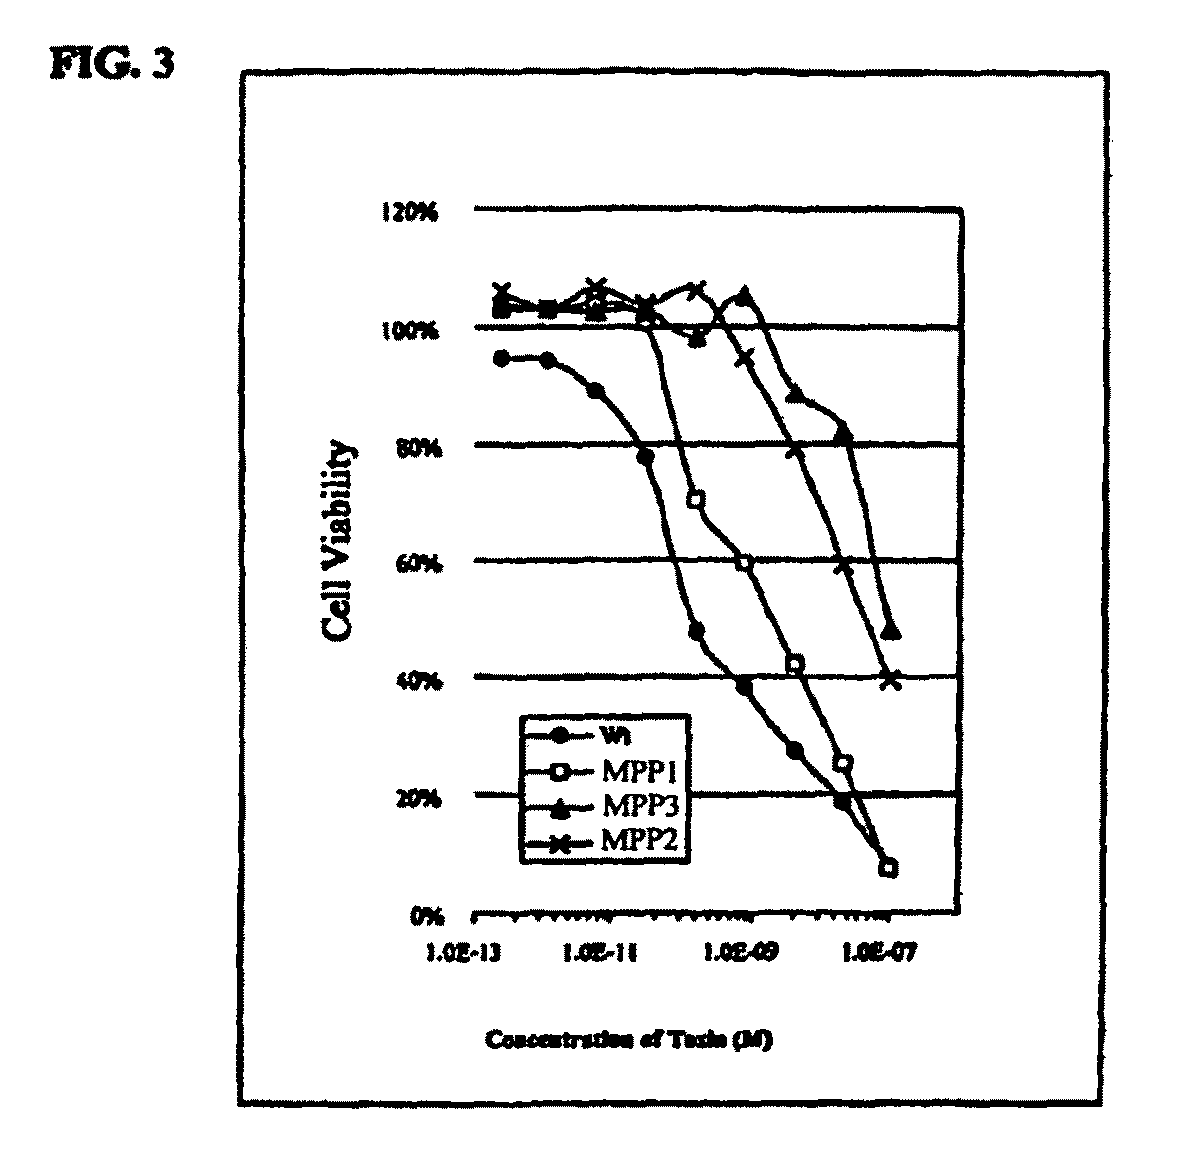 Method of treating or preventing benign prostatic hyperplasia using modified pore-forming proteins